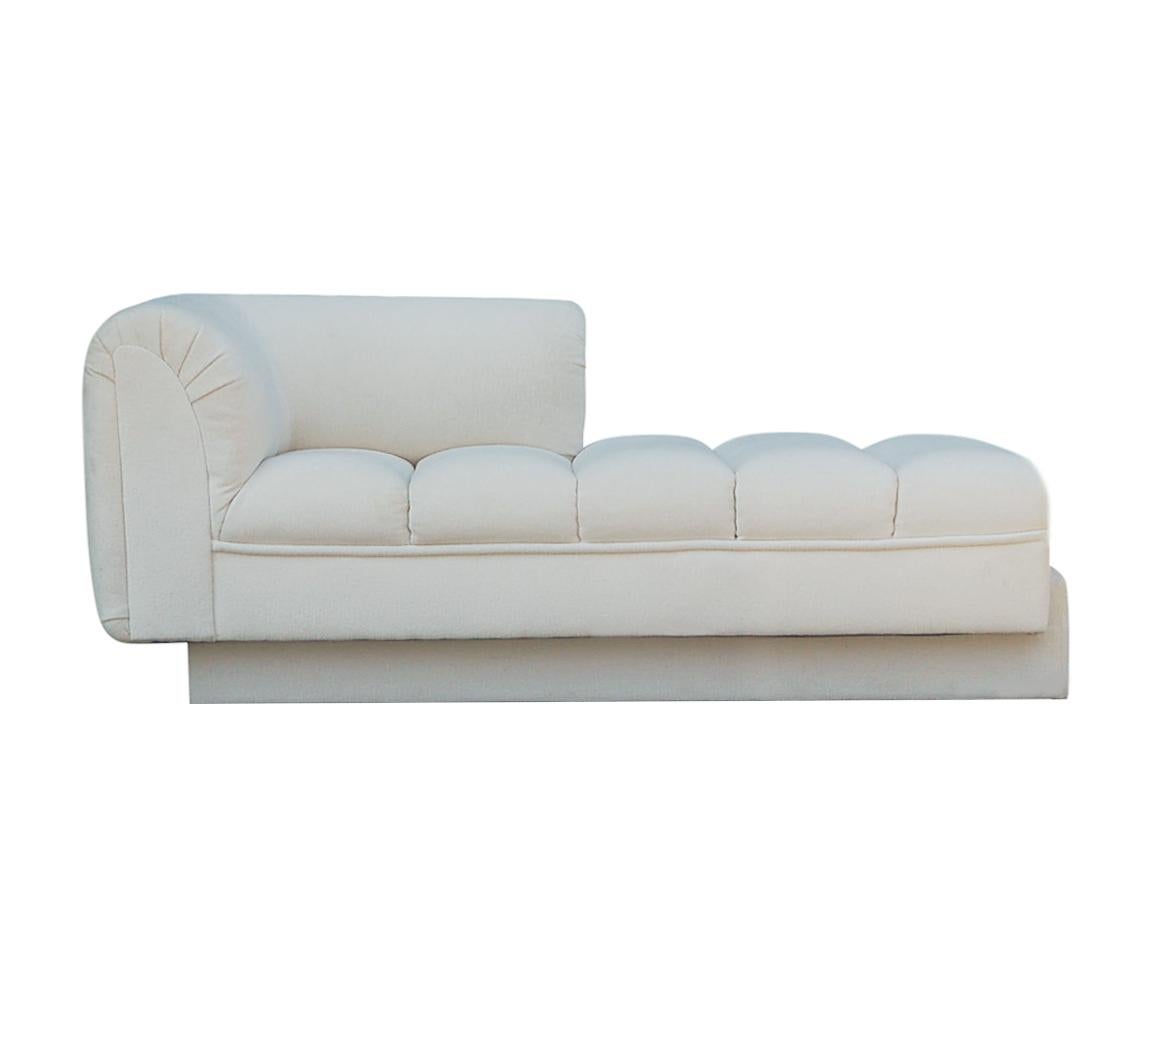 A stunning chaise lounge or loveseat with incredible design lines. This well built chaise is by Directional furniture, circa 1970s. It features a ribbed channel seating area with fine quality construction. Manufacturers tags. Original fabric is